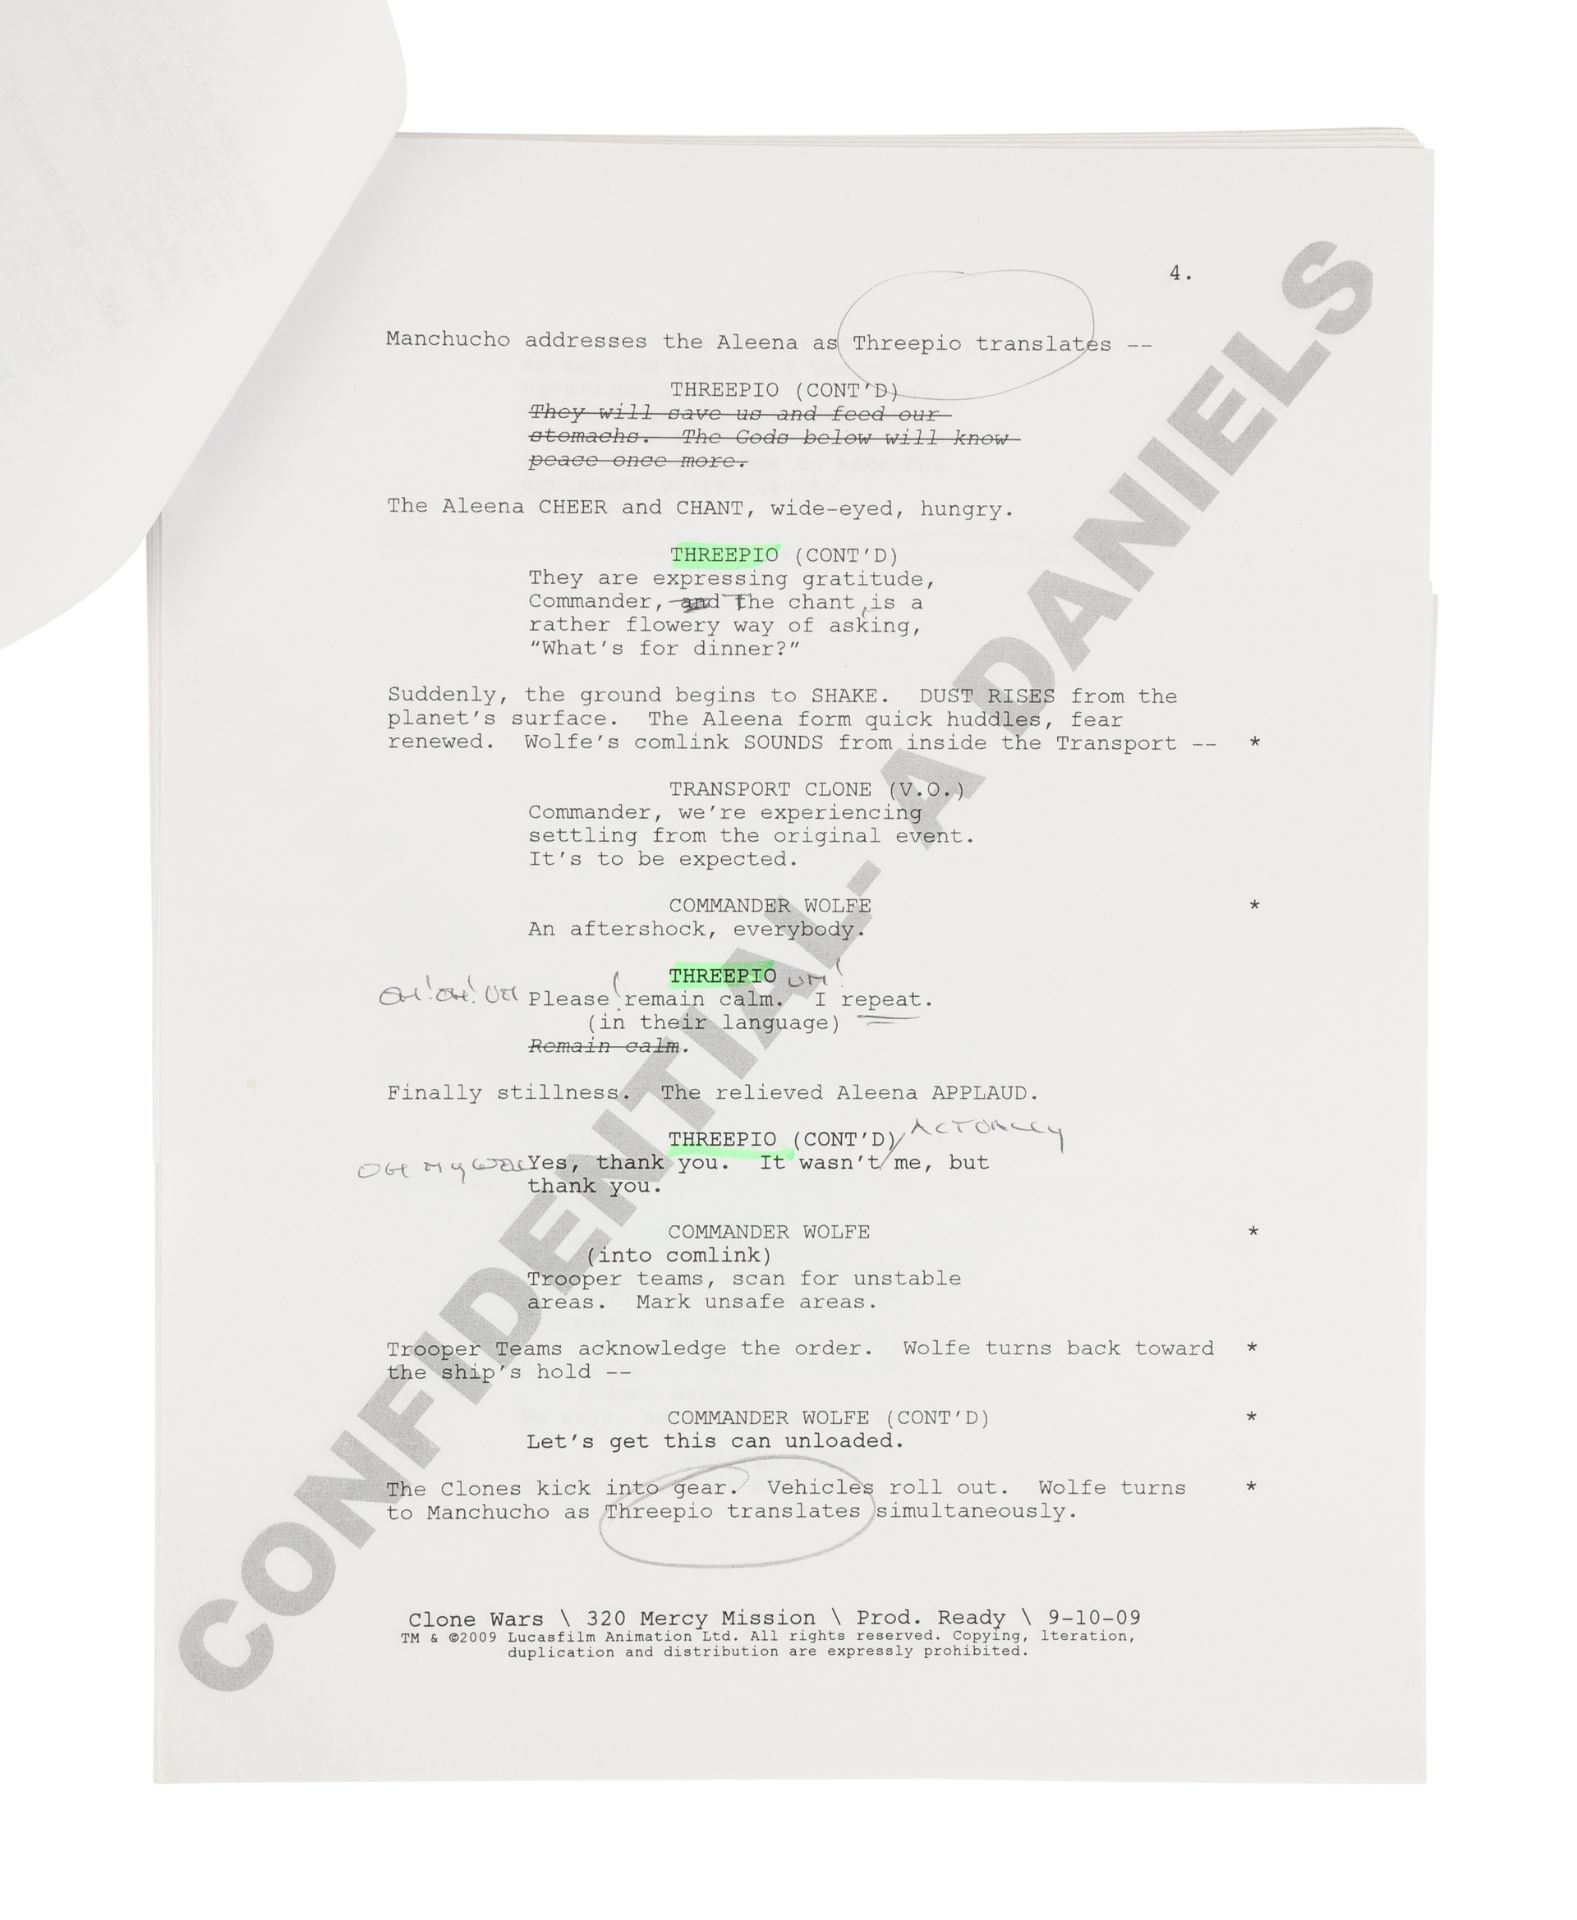 STAR WARS: THE CLONE WARS (2008-2020) - Anthony Daniels Collection: Pair of Anthony Daniels' Scripts - Image 7 of 12